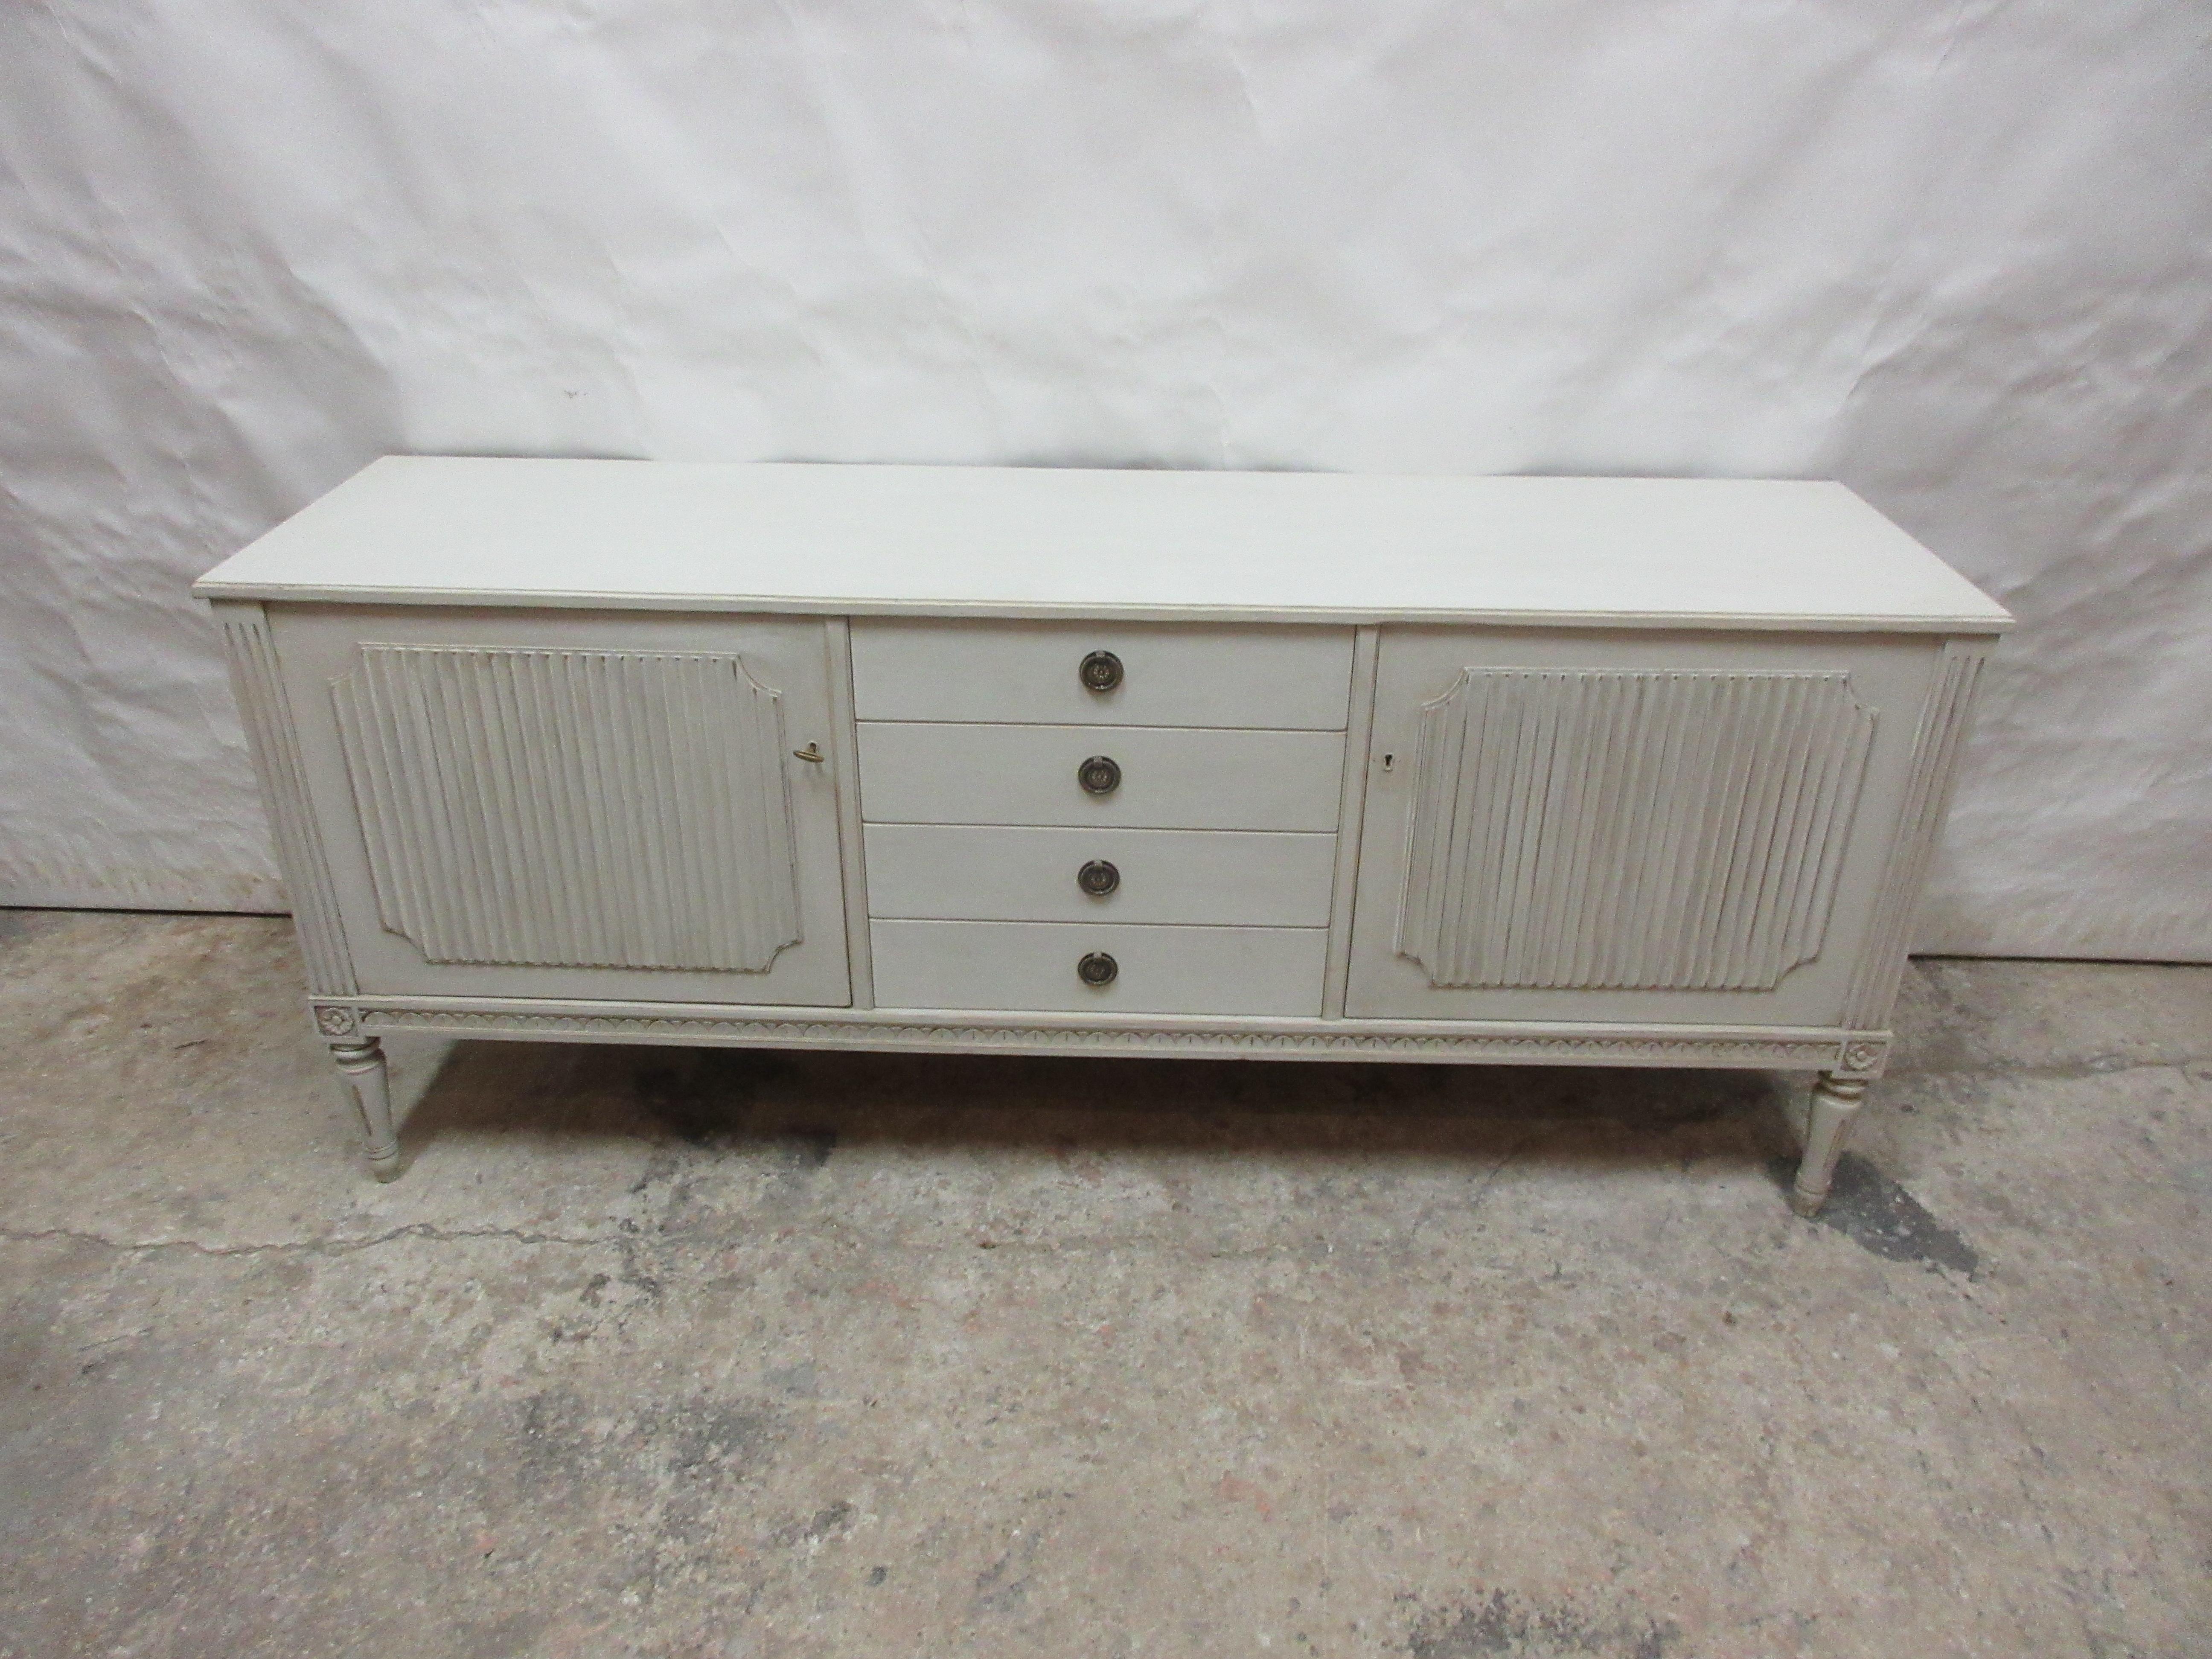 This is a Swedish Gustavian style sideboard, its been restored and repainted in Milk Paints 